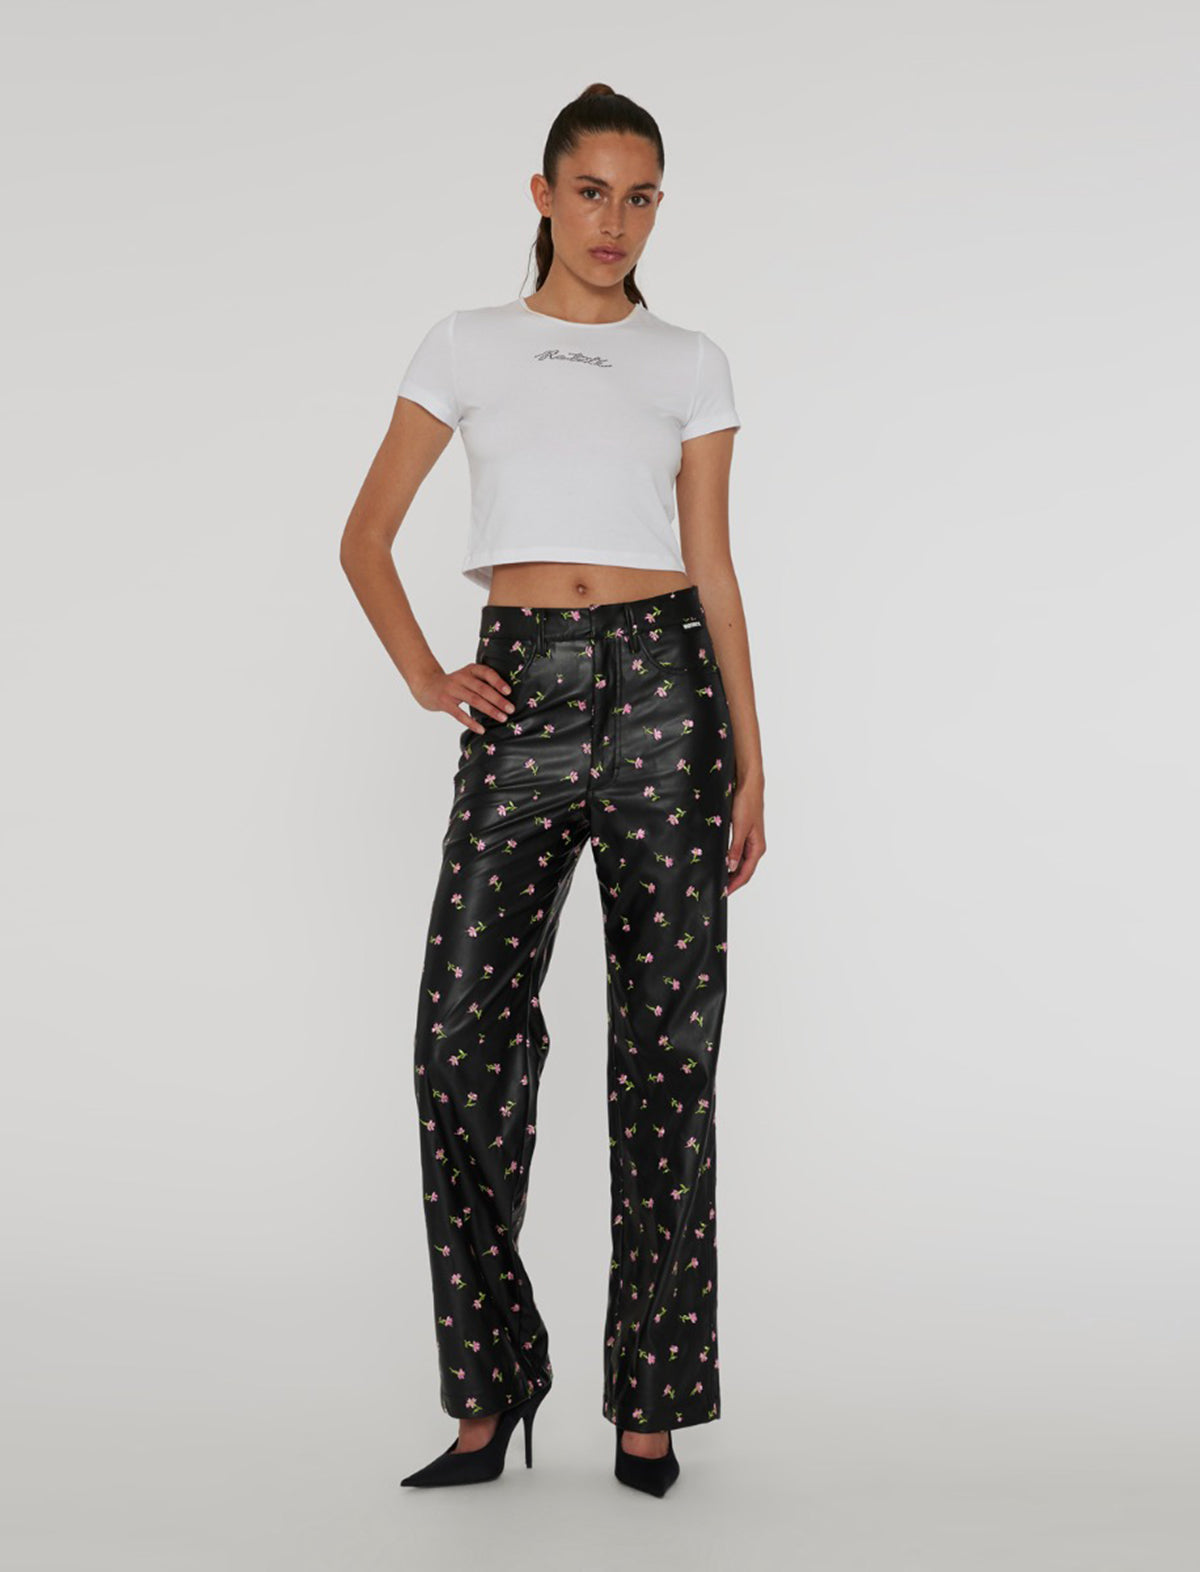 ROTATE BIRGER CHRISTENSEN PU Leather Straight Pants In Black/ Pink